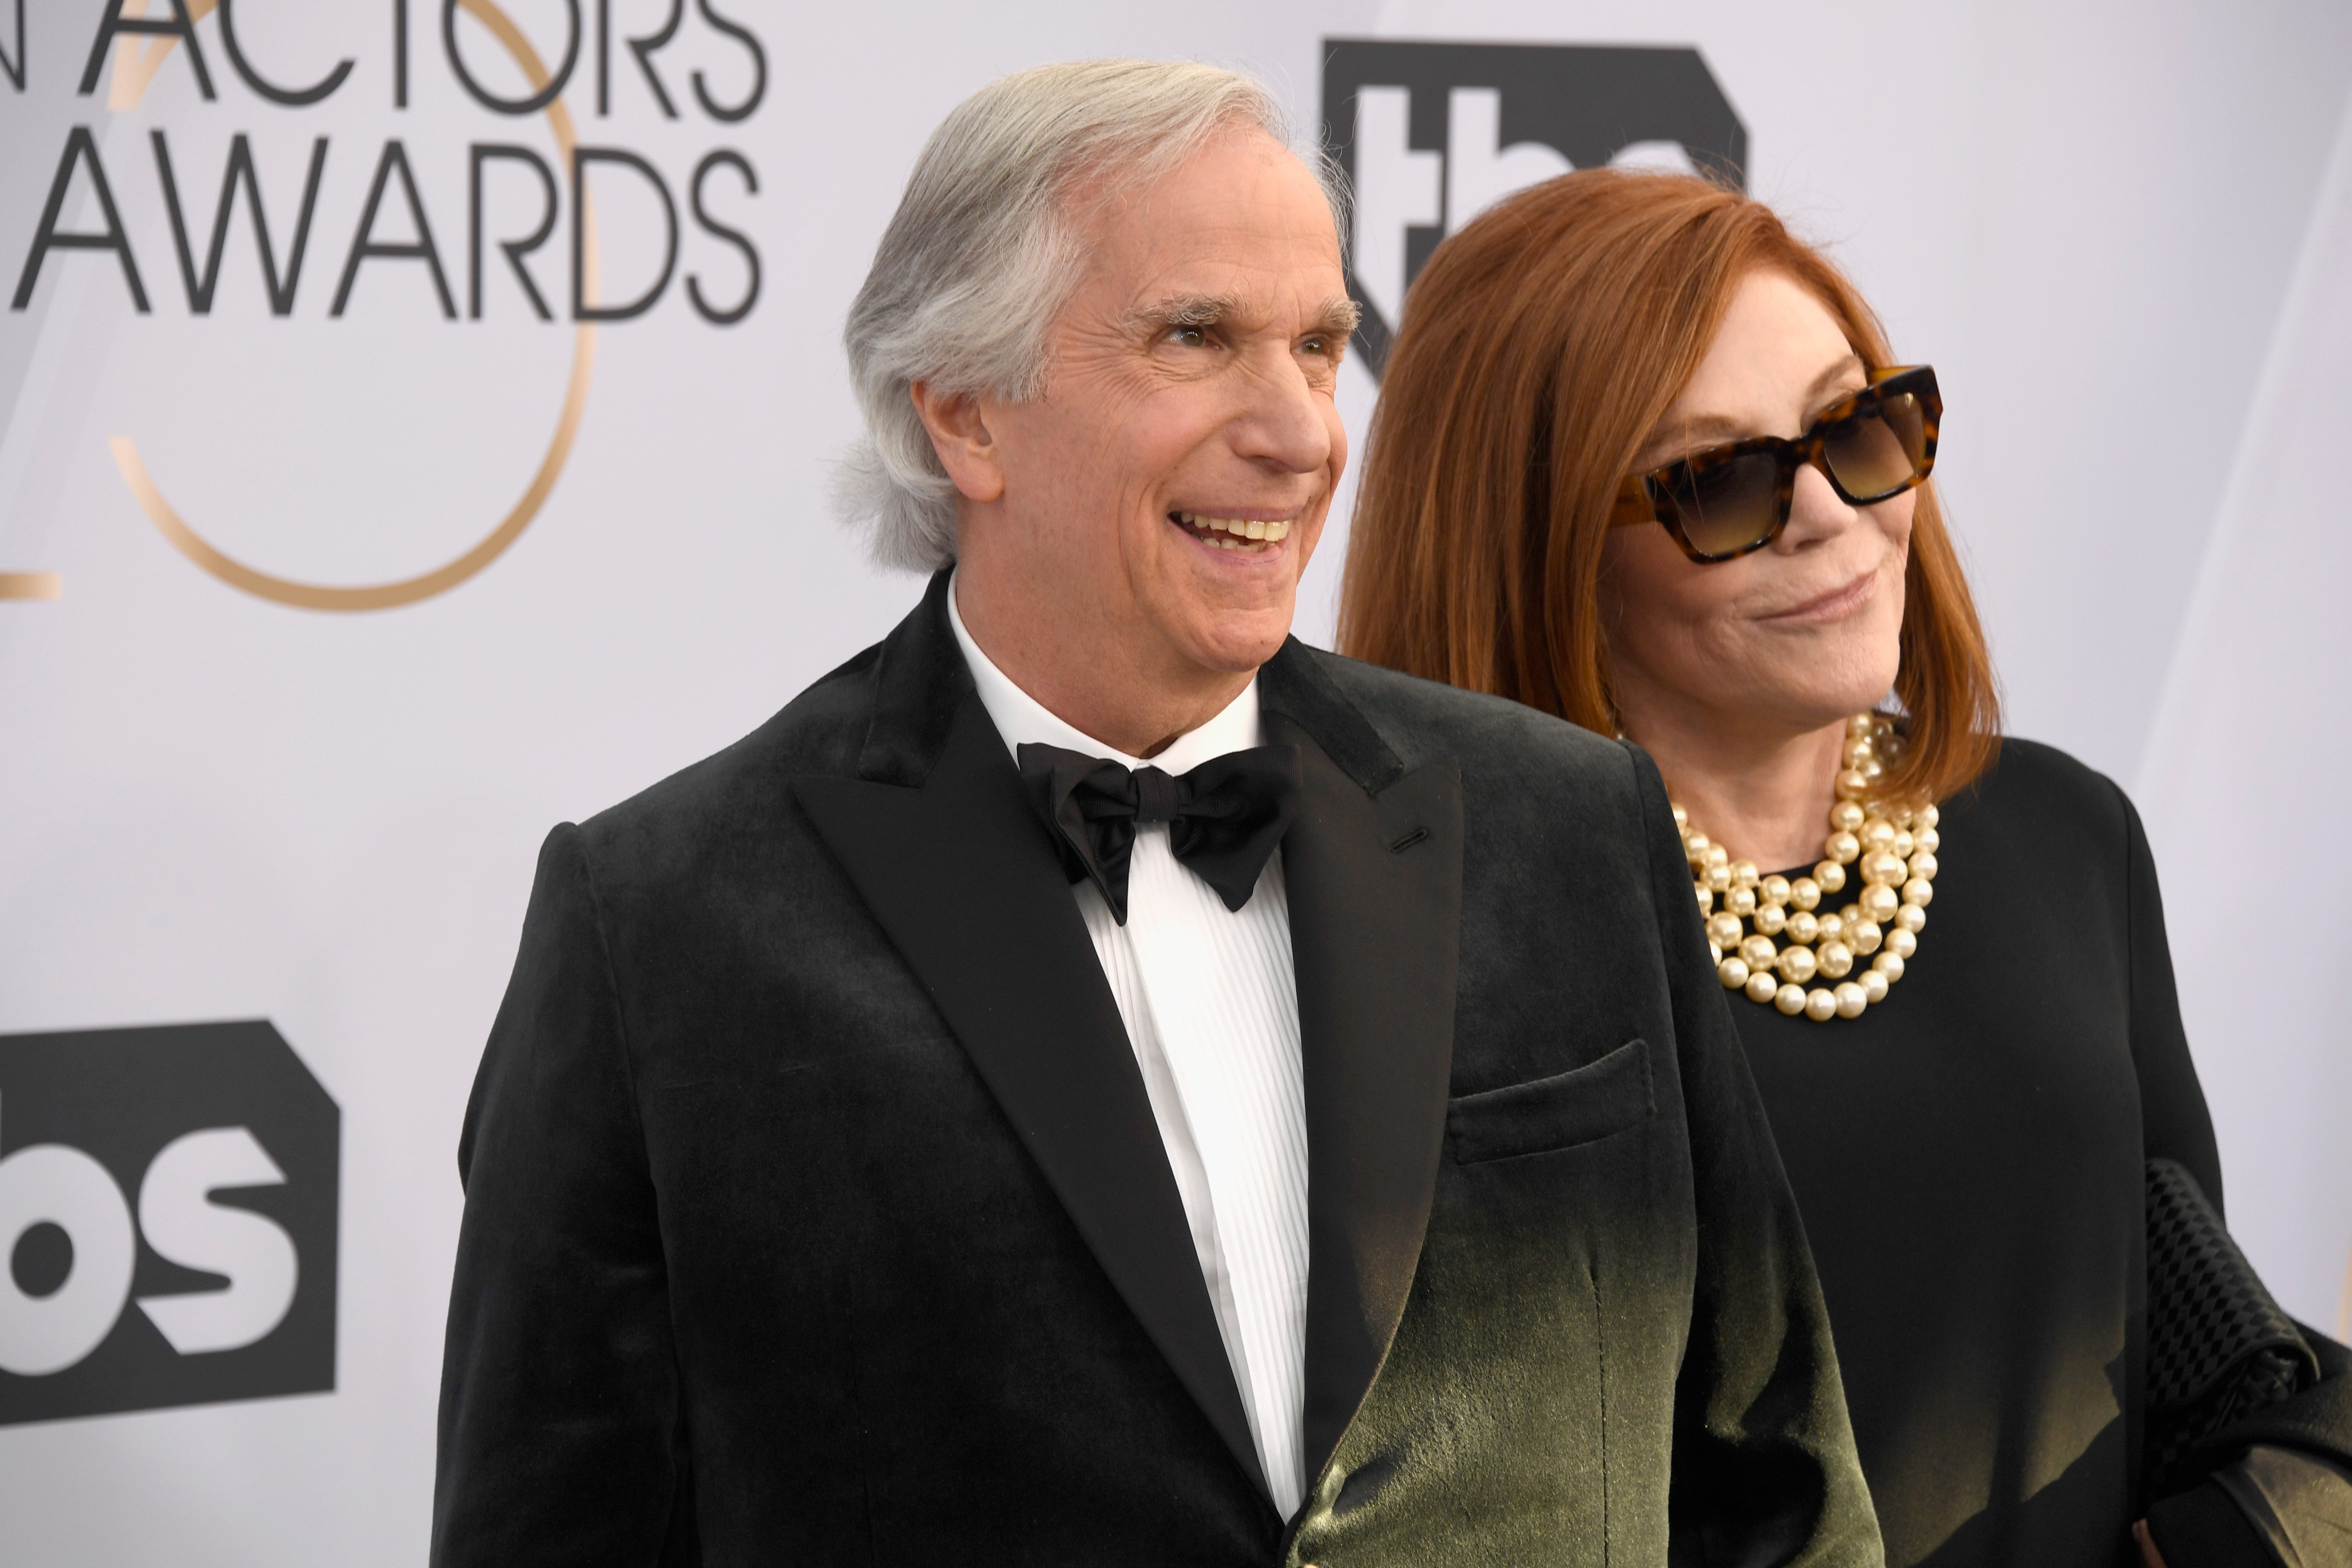 Henry Winkler and his wife Stacey attend the 25th Annual Screen Actors Guild Awards at The Shrine Auditorium on January 27, 2019. | Source: Getty Images